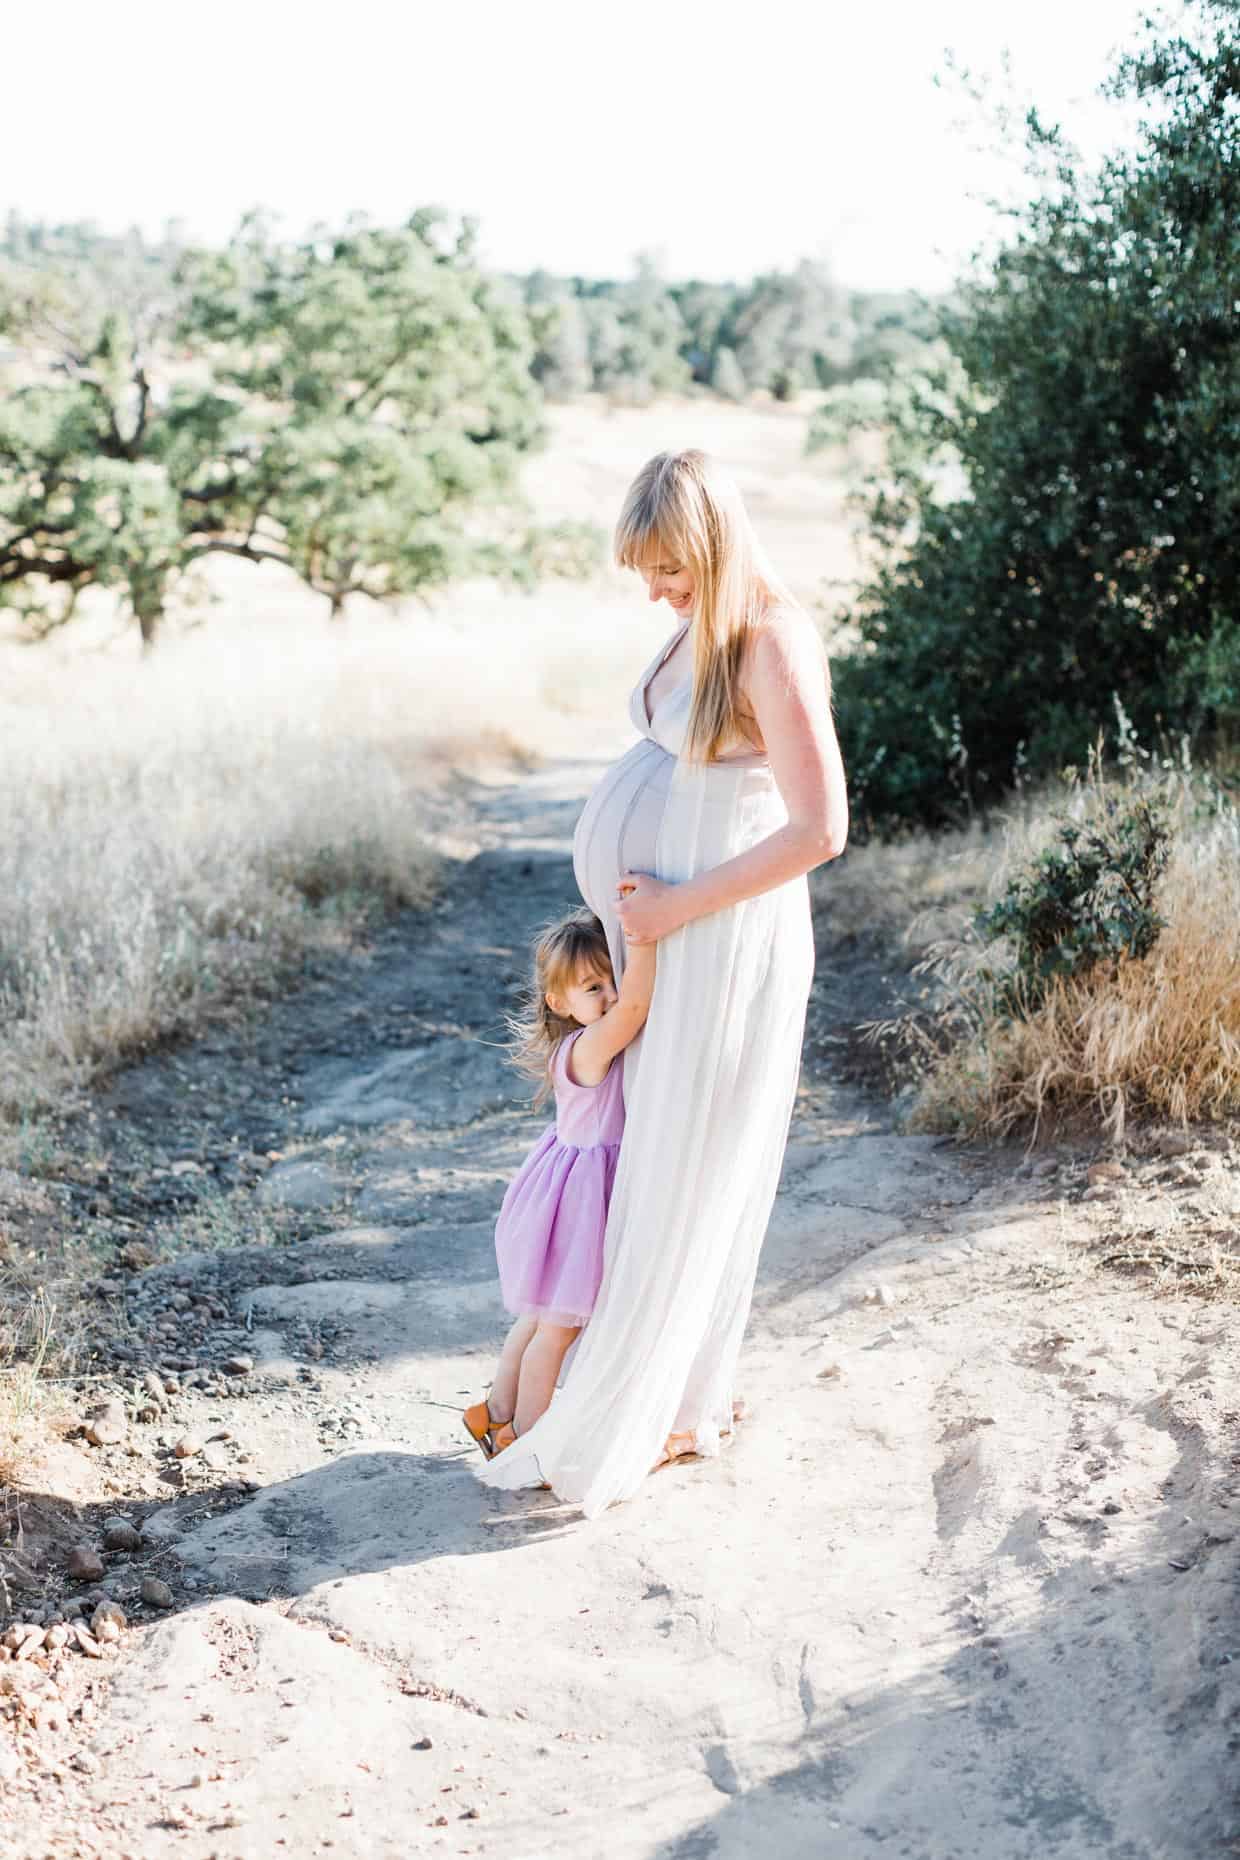 Maternity Photos with Toddler #maternity #maternityphotos #pregnancy #family #toddler